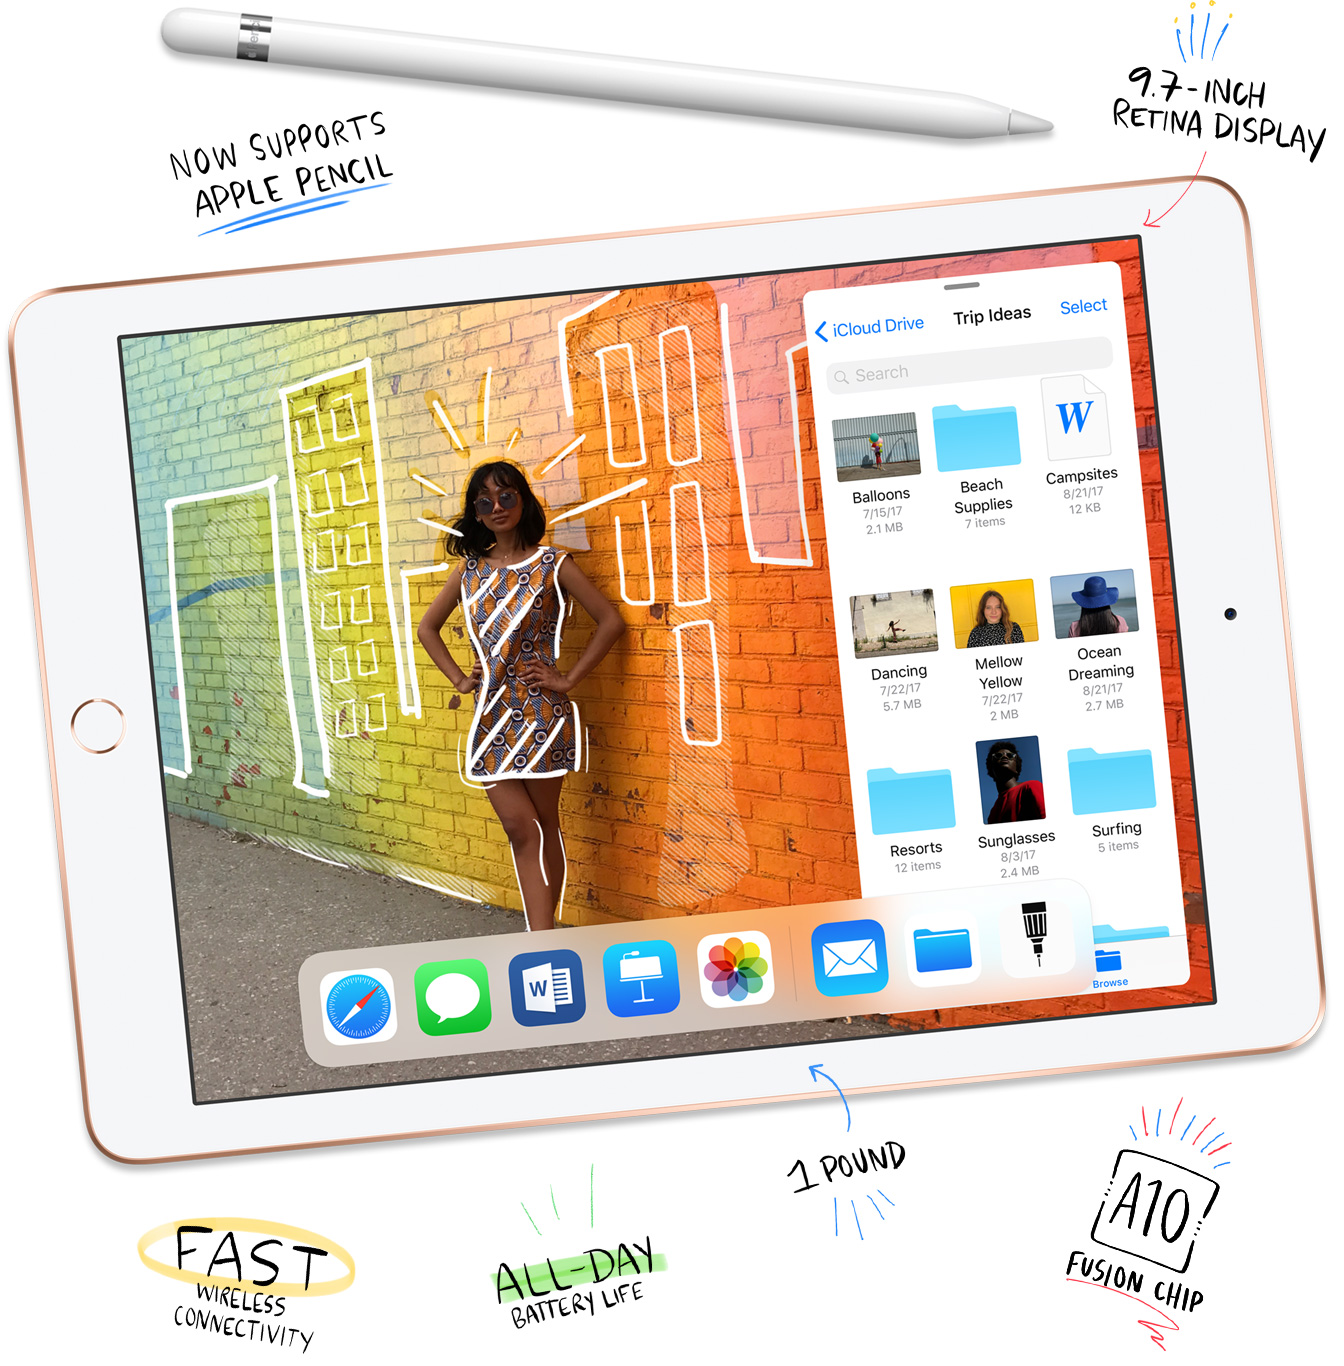 Now Supports Apple Pencil. 9.7-inch Retina Display. Fast Wireless Connectivity. All-Day Battery Life. 1 Pound. A10 Fusion Chip.